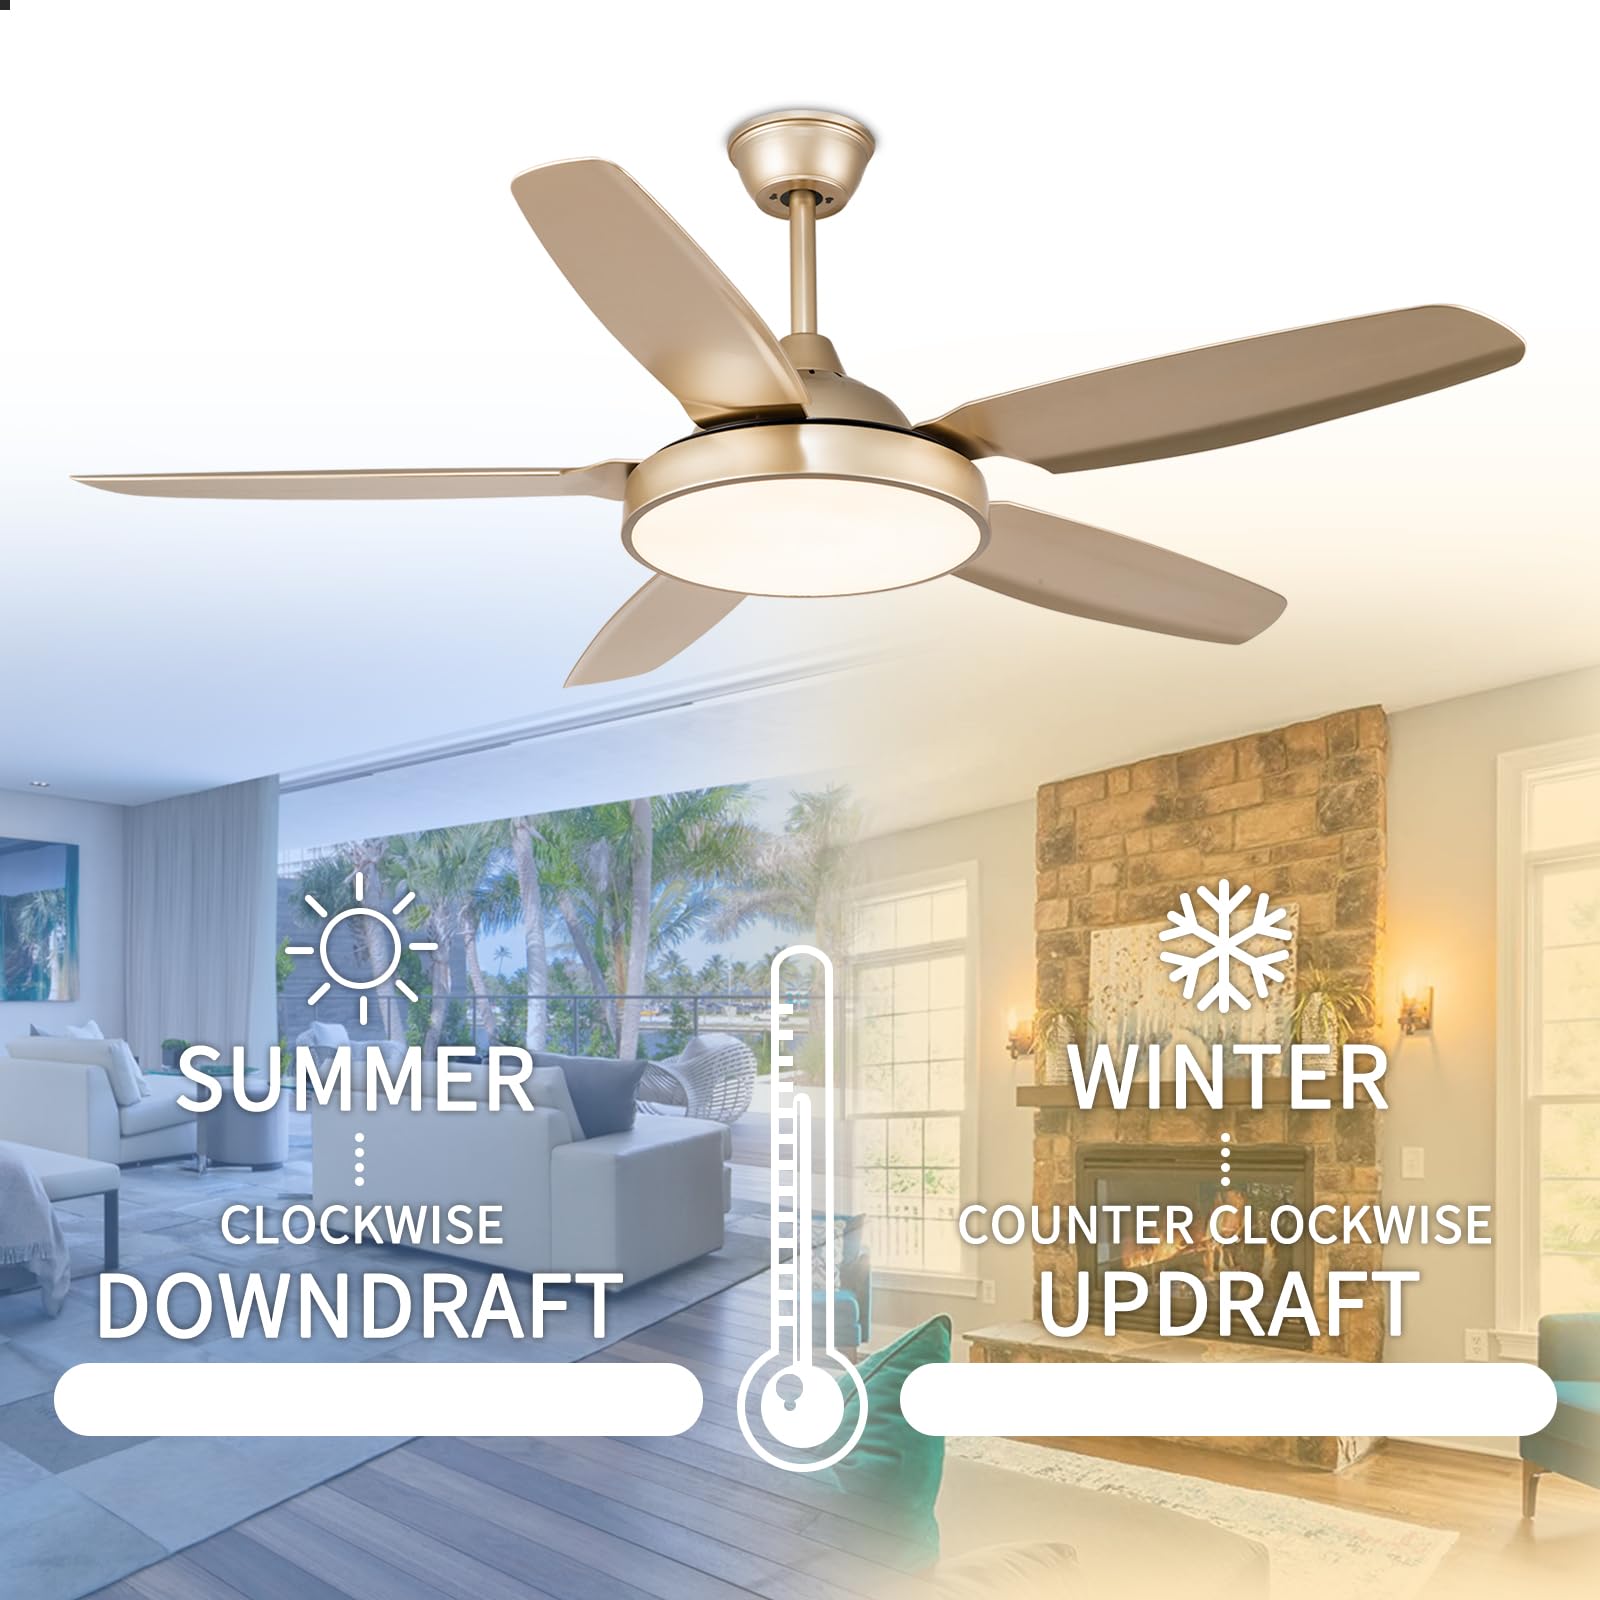 Morpholife 52" Gold Ceiling Fan with Lights Remote Control, Modern Champagne LED Chandelier Ceiling Fan Light Kit, Indoor Farmhouse Rustic Ceiling Fan with 5 Abs Blades for Living Room, Bedroom